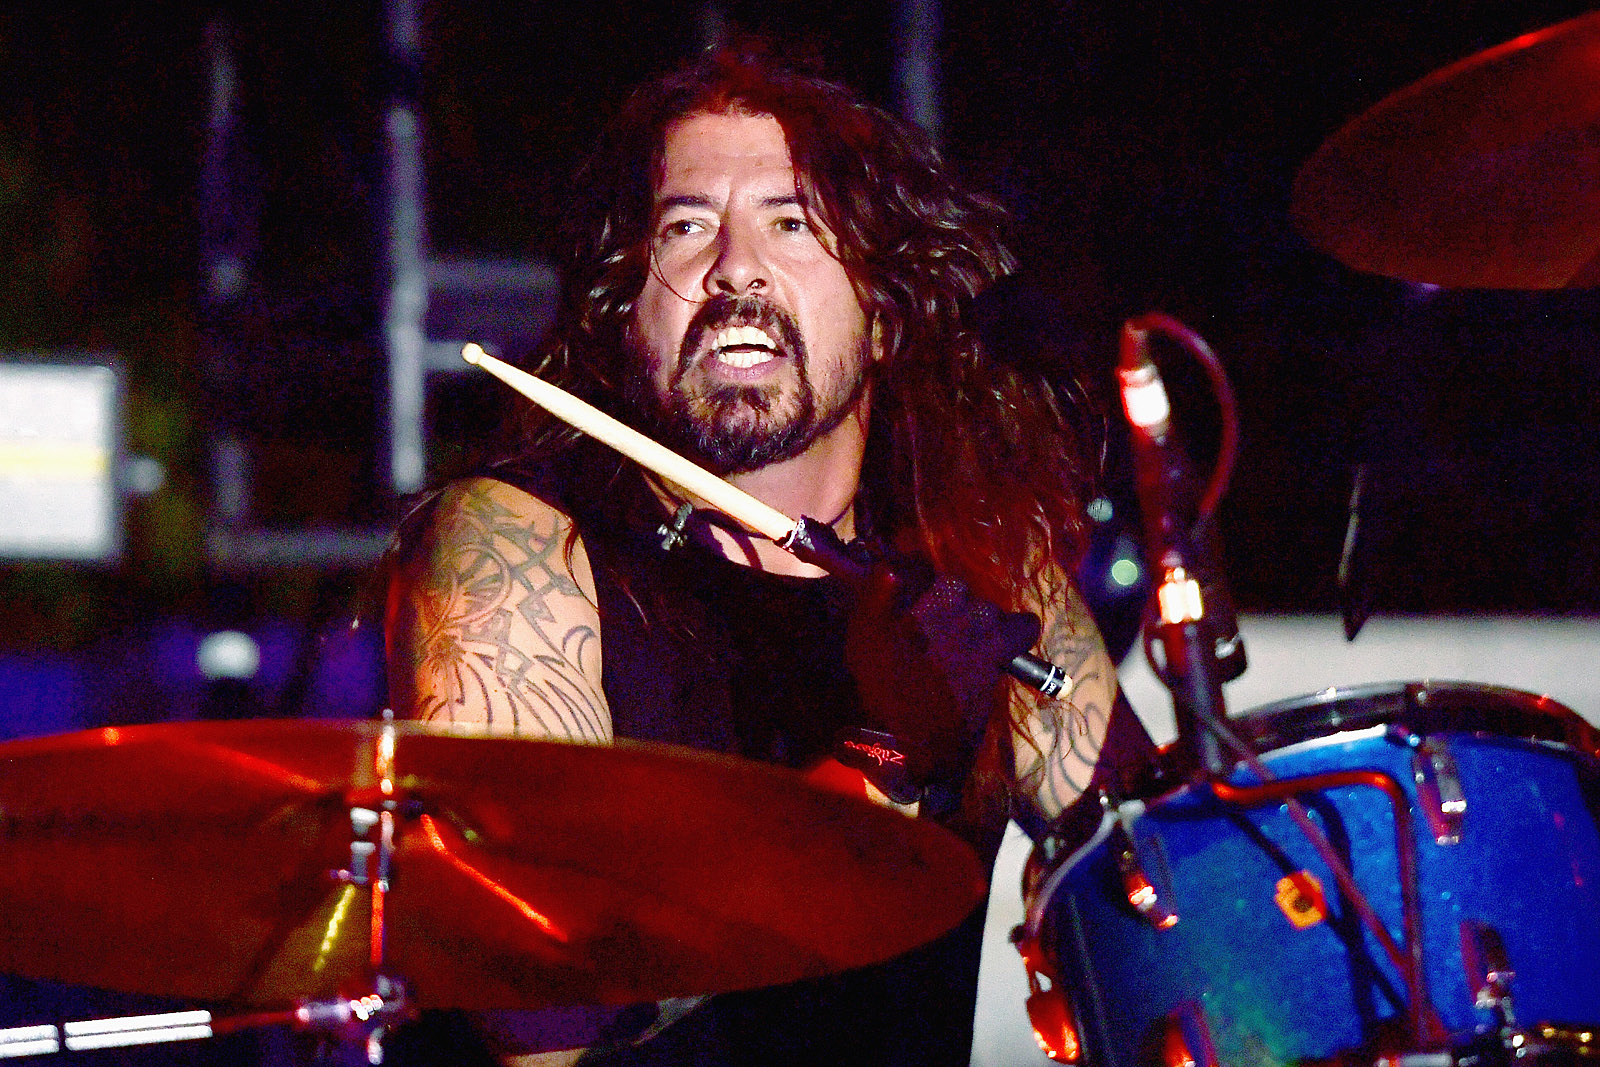 Watch Dave Grohl Jam at Ronnie James Dio Memorial